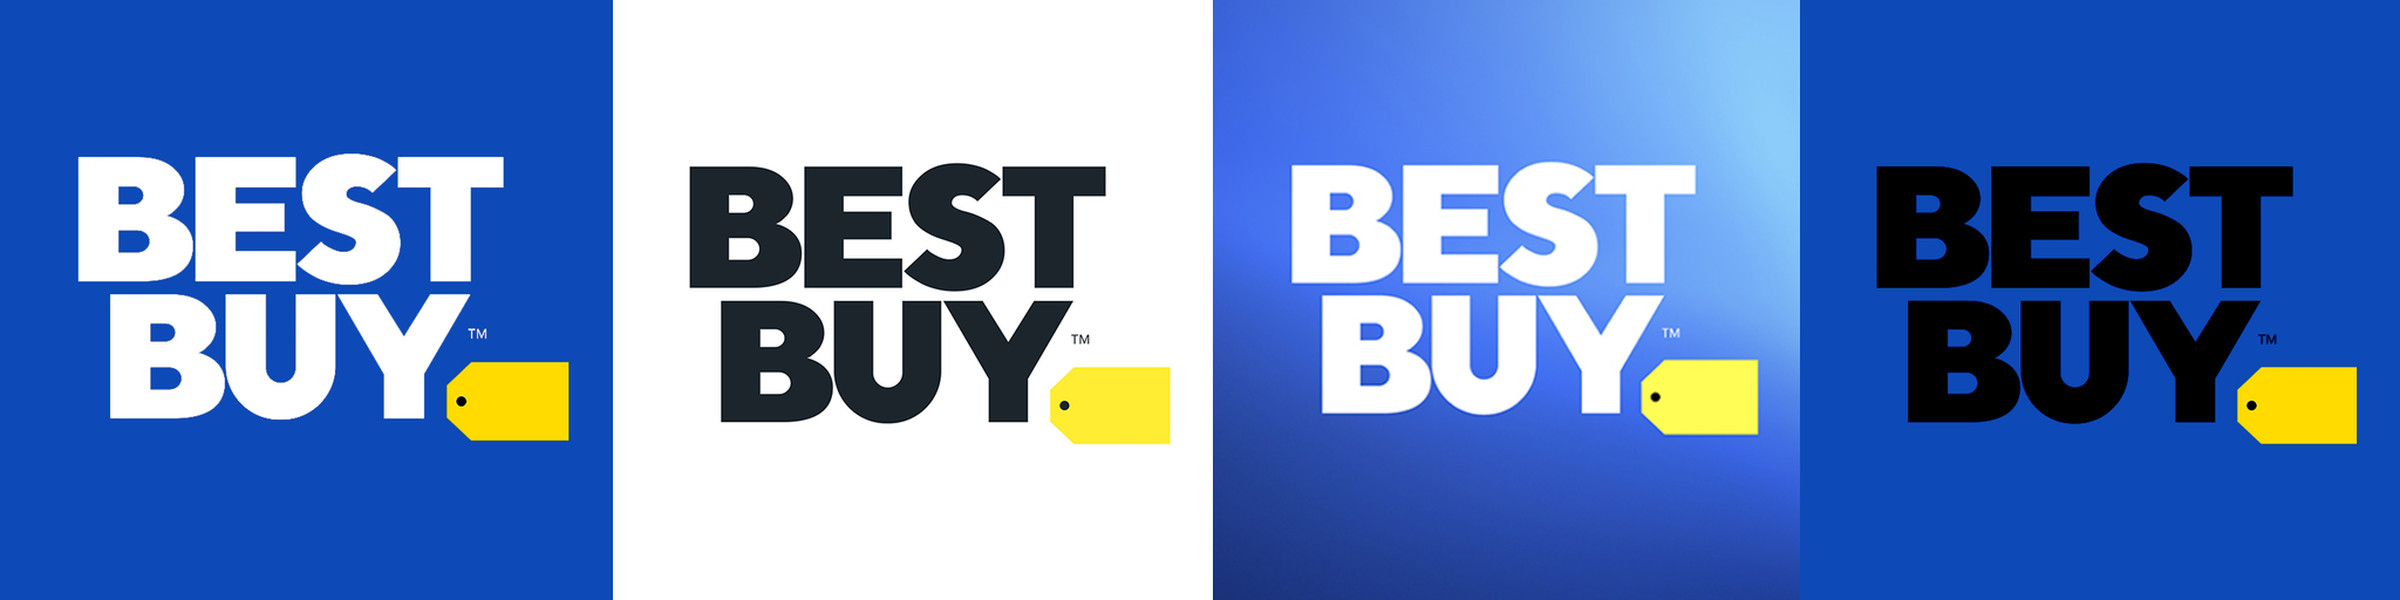 I am reasonably confident that one of these combinations is actually Best Buy’s new logo.